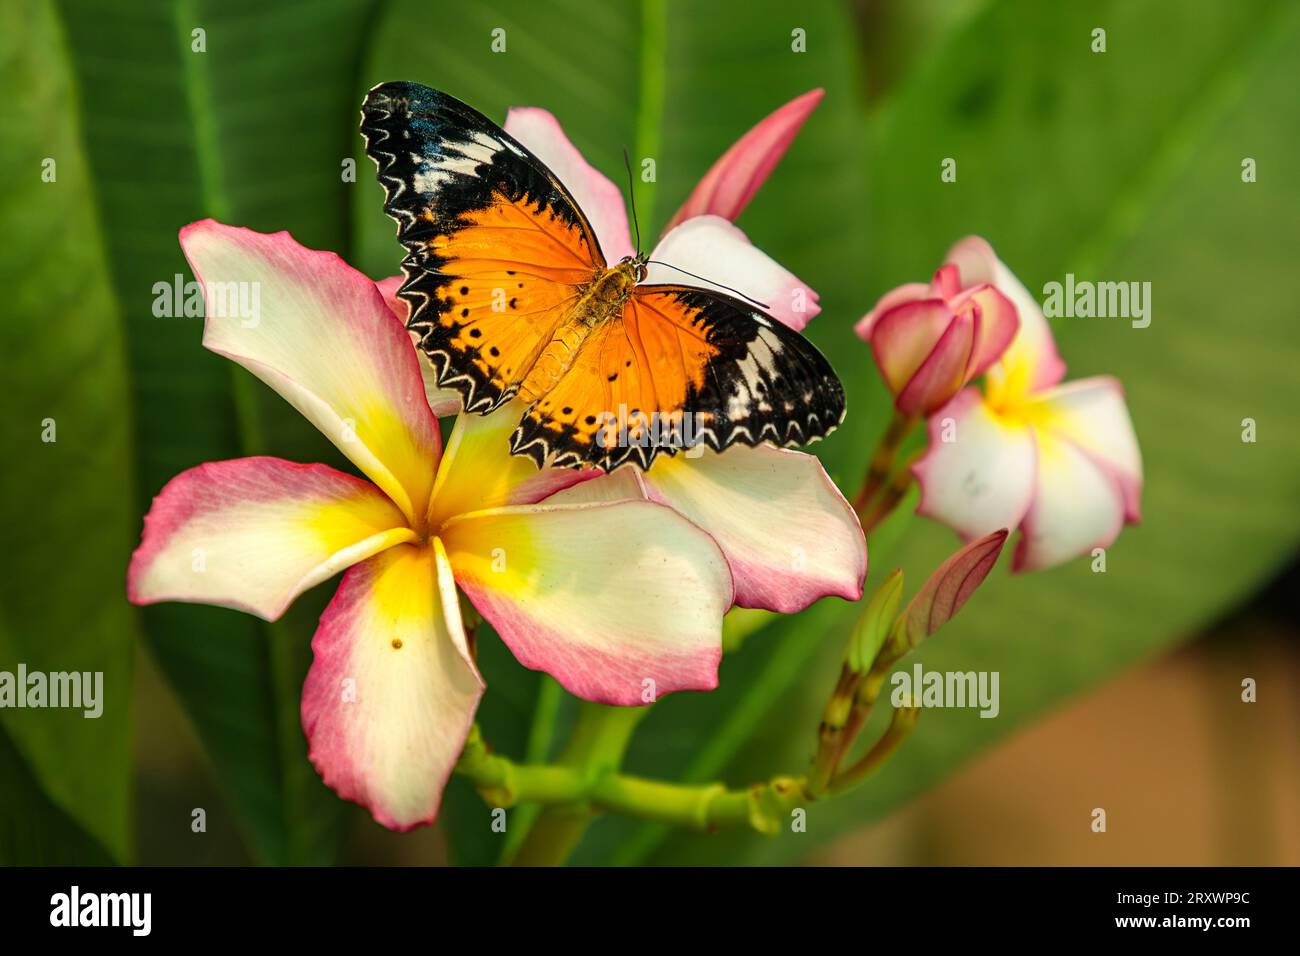 A perfect Leopard Lacewing Butterfly rests on pink and white Plumeria flowers in a butterfly conservatory. Stock Photo